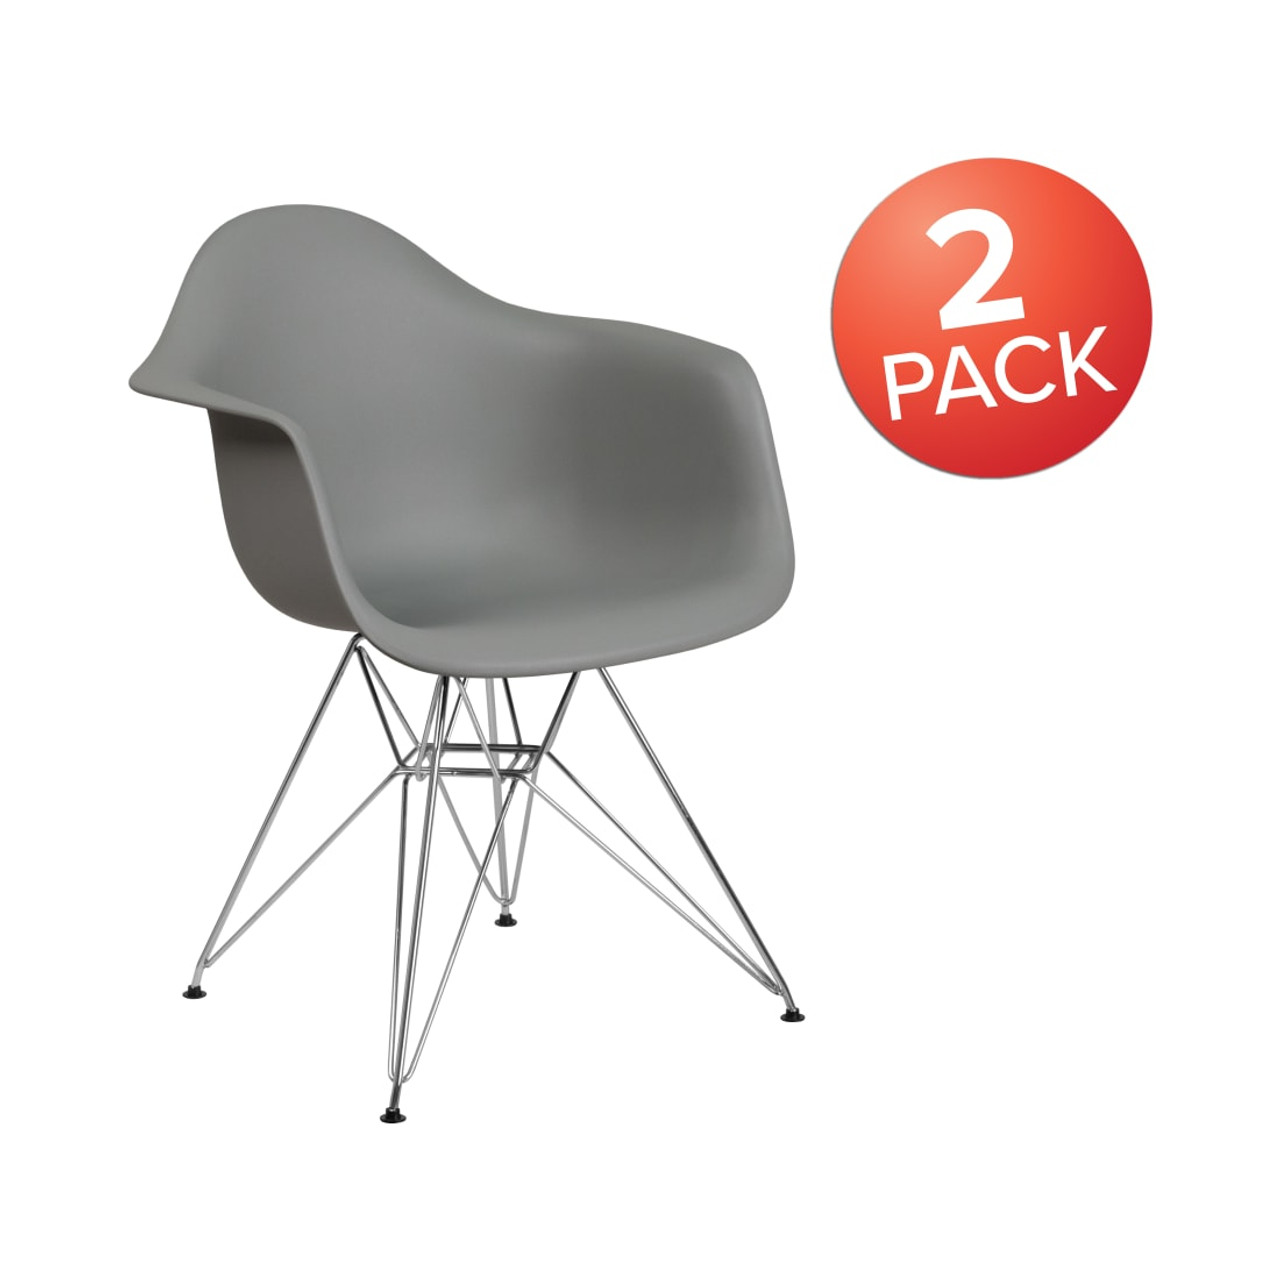 2 Pack Alonza Series Moss Gray Plastic Chair with Chrome Base